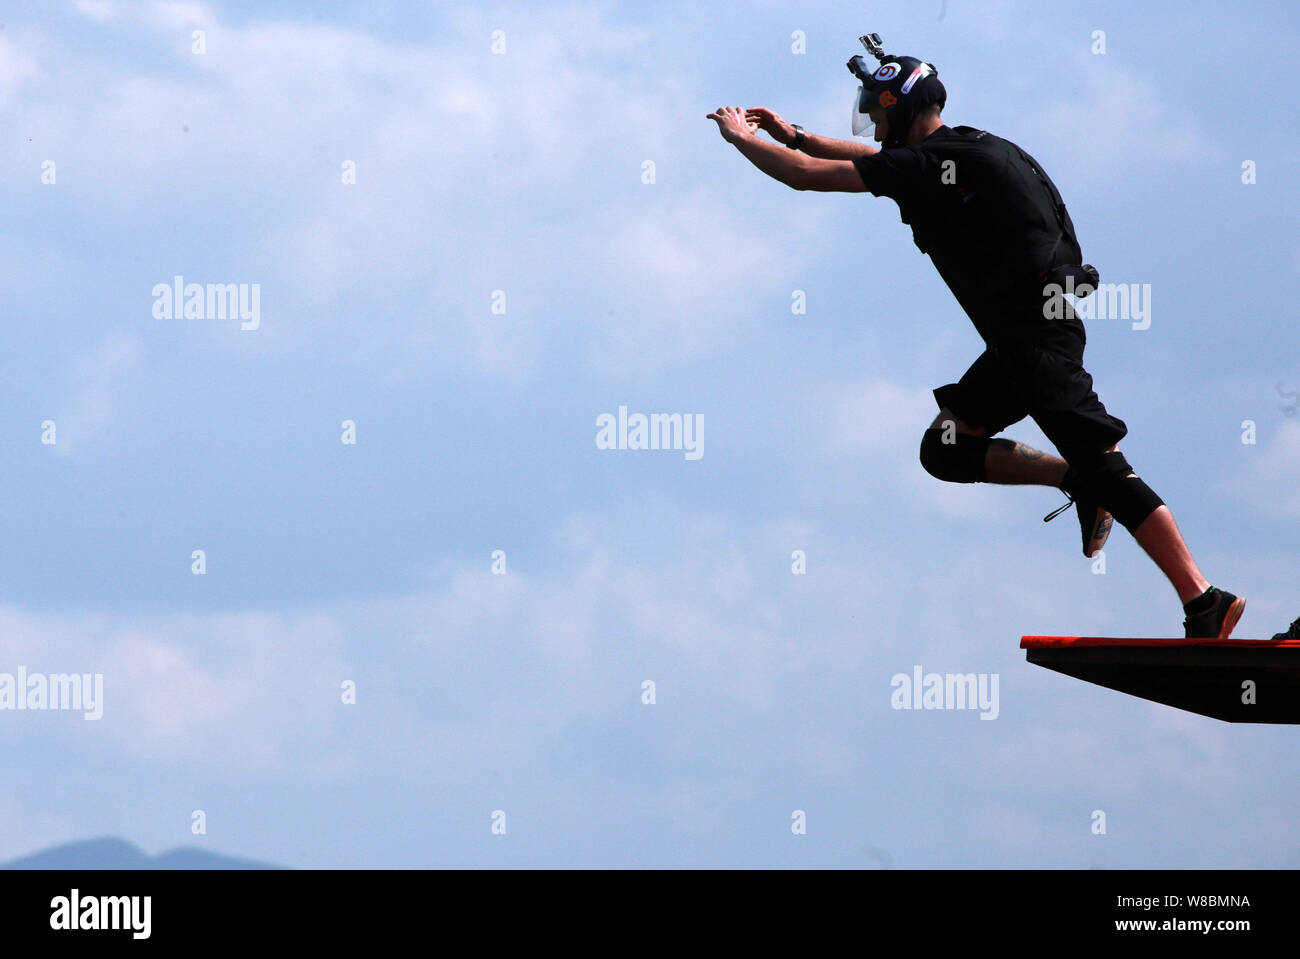 A contestant jumps off the glass cantilever bridge on the cliff during the 2016 World Low-Altitude Parachute Jump in Longgang scenic area in Yunyang c Stock Photo